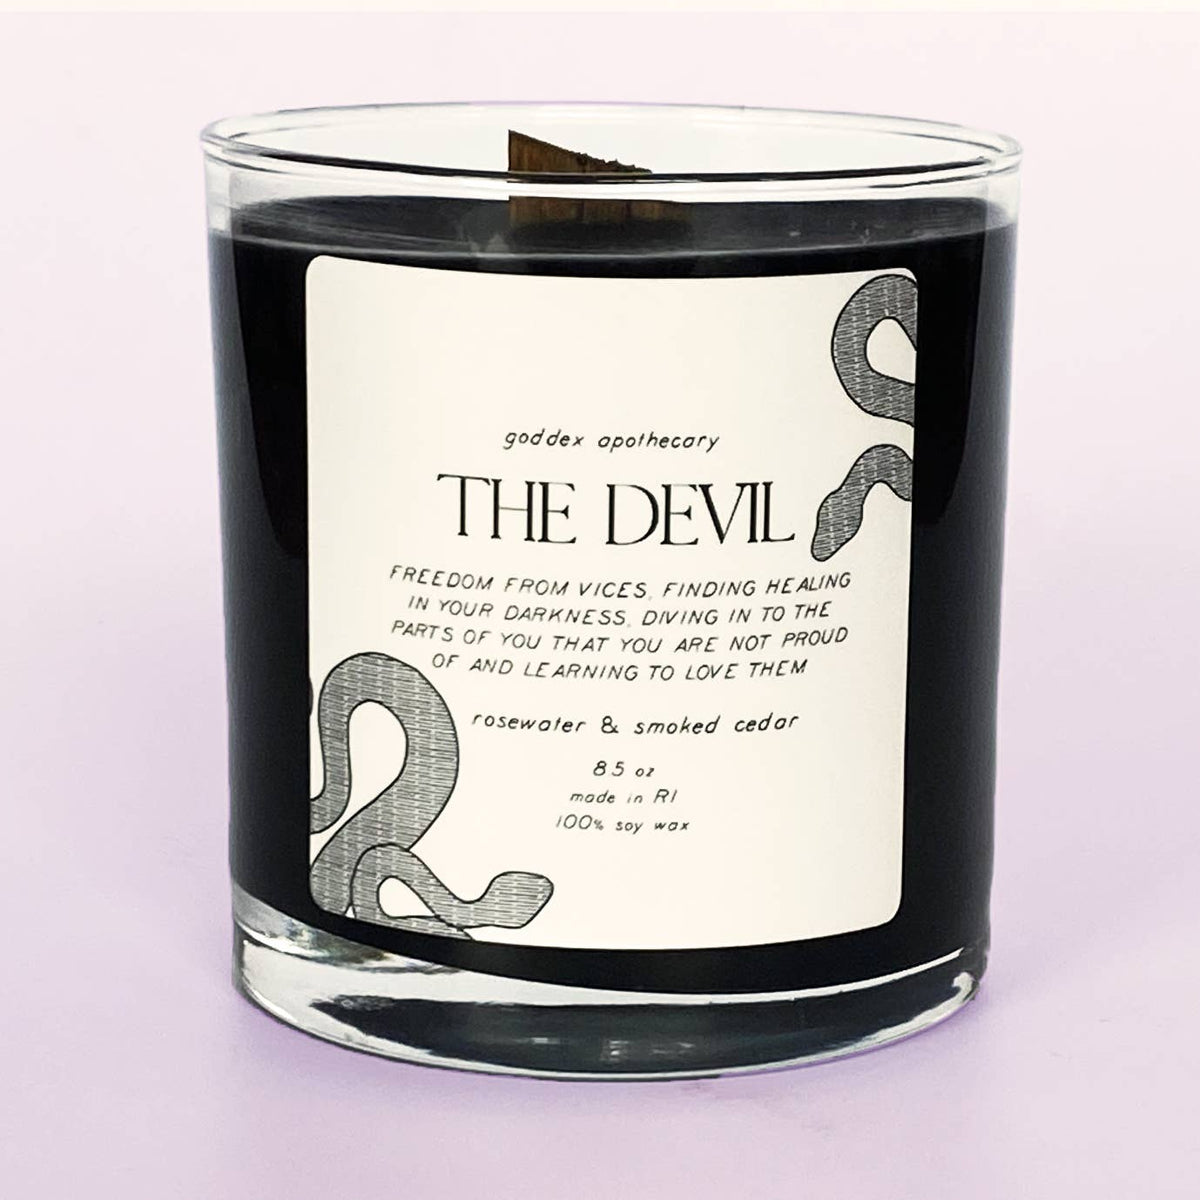 Goddex Apothecary The Devil Candle